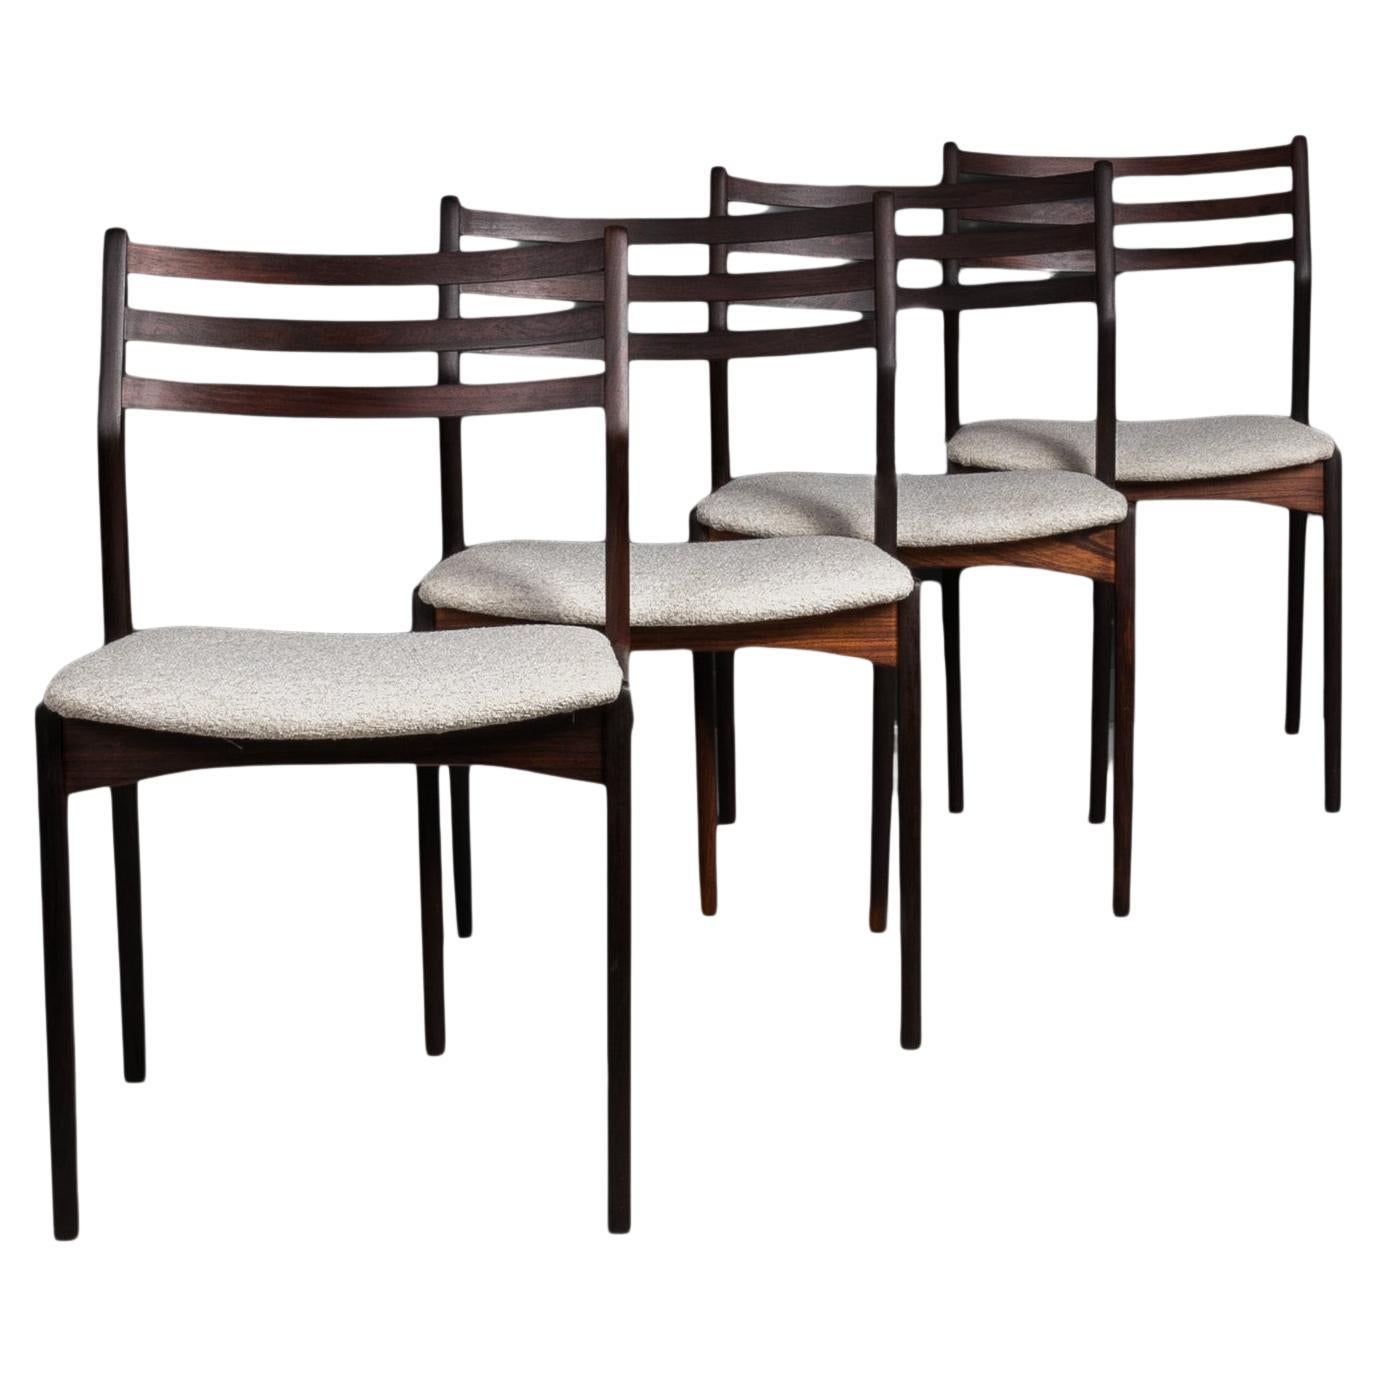 Set of 4 Dining Chairs by Vestervig Eriksen, 1960s, Fully Renovated For Sale